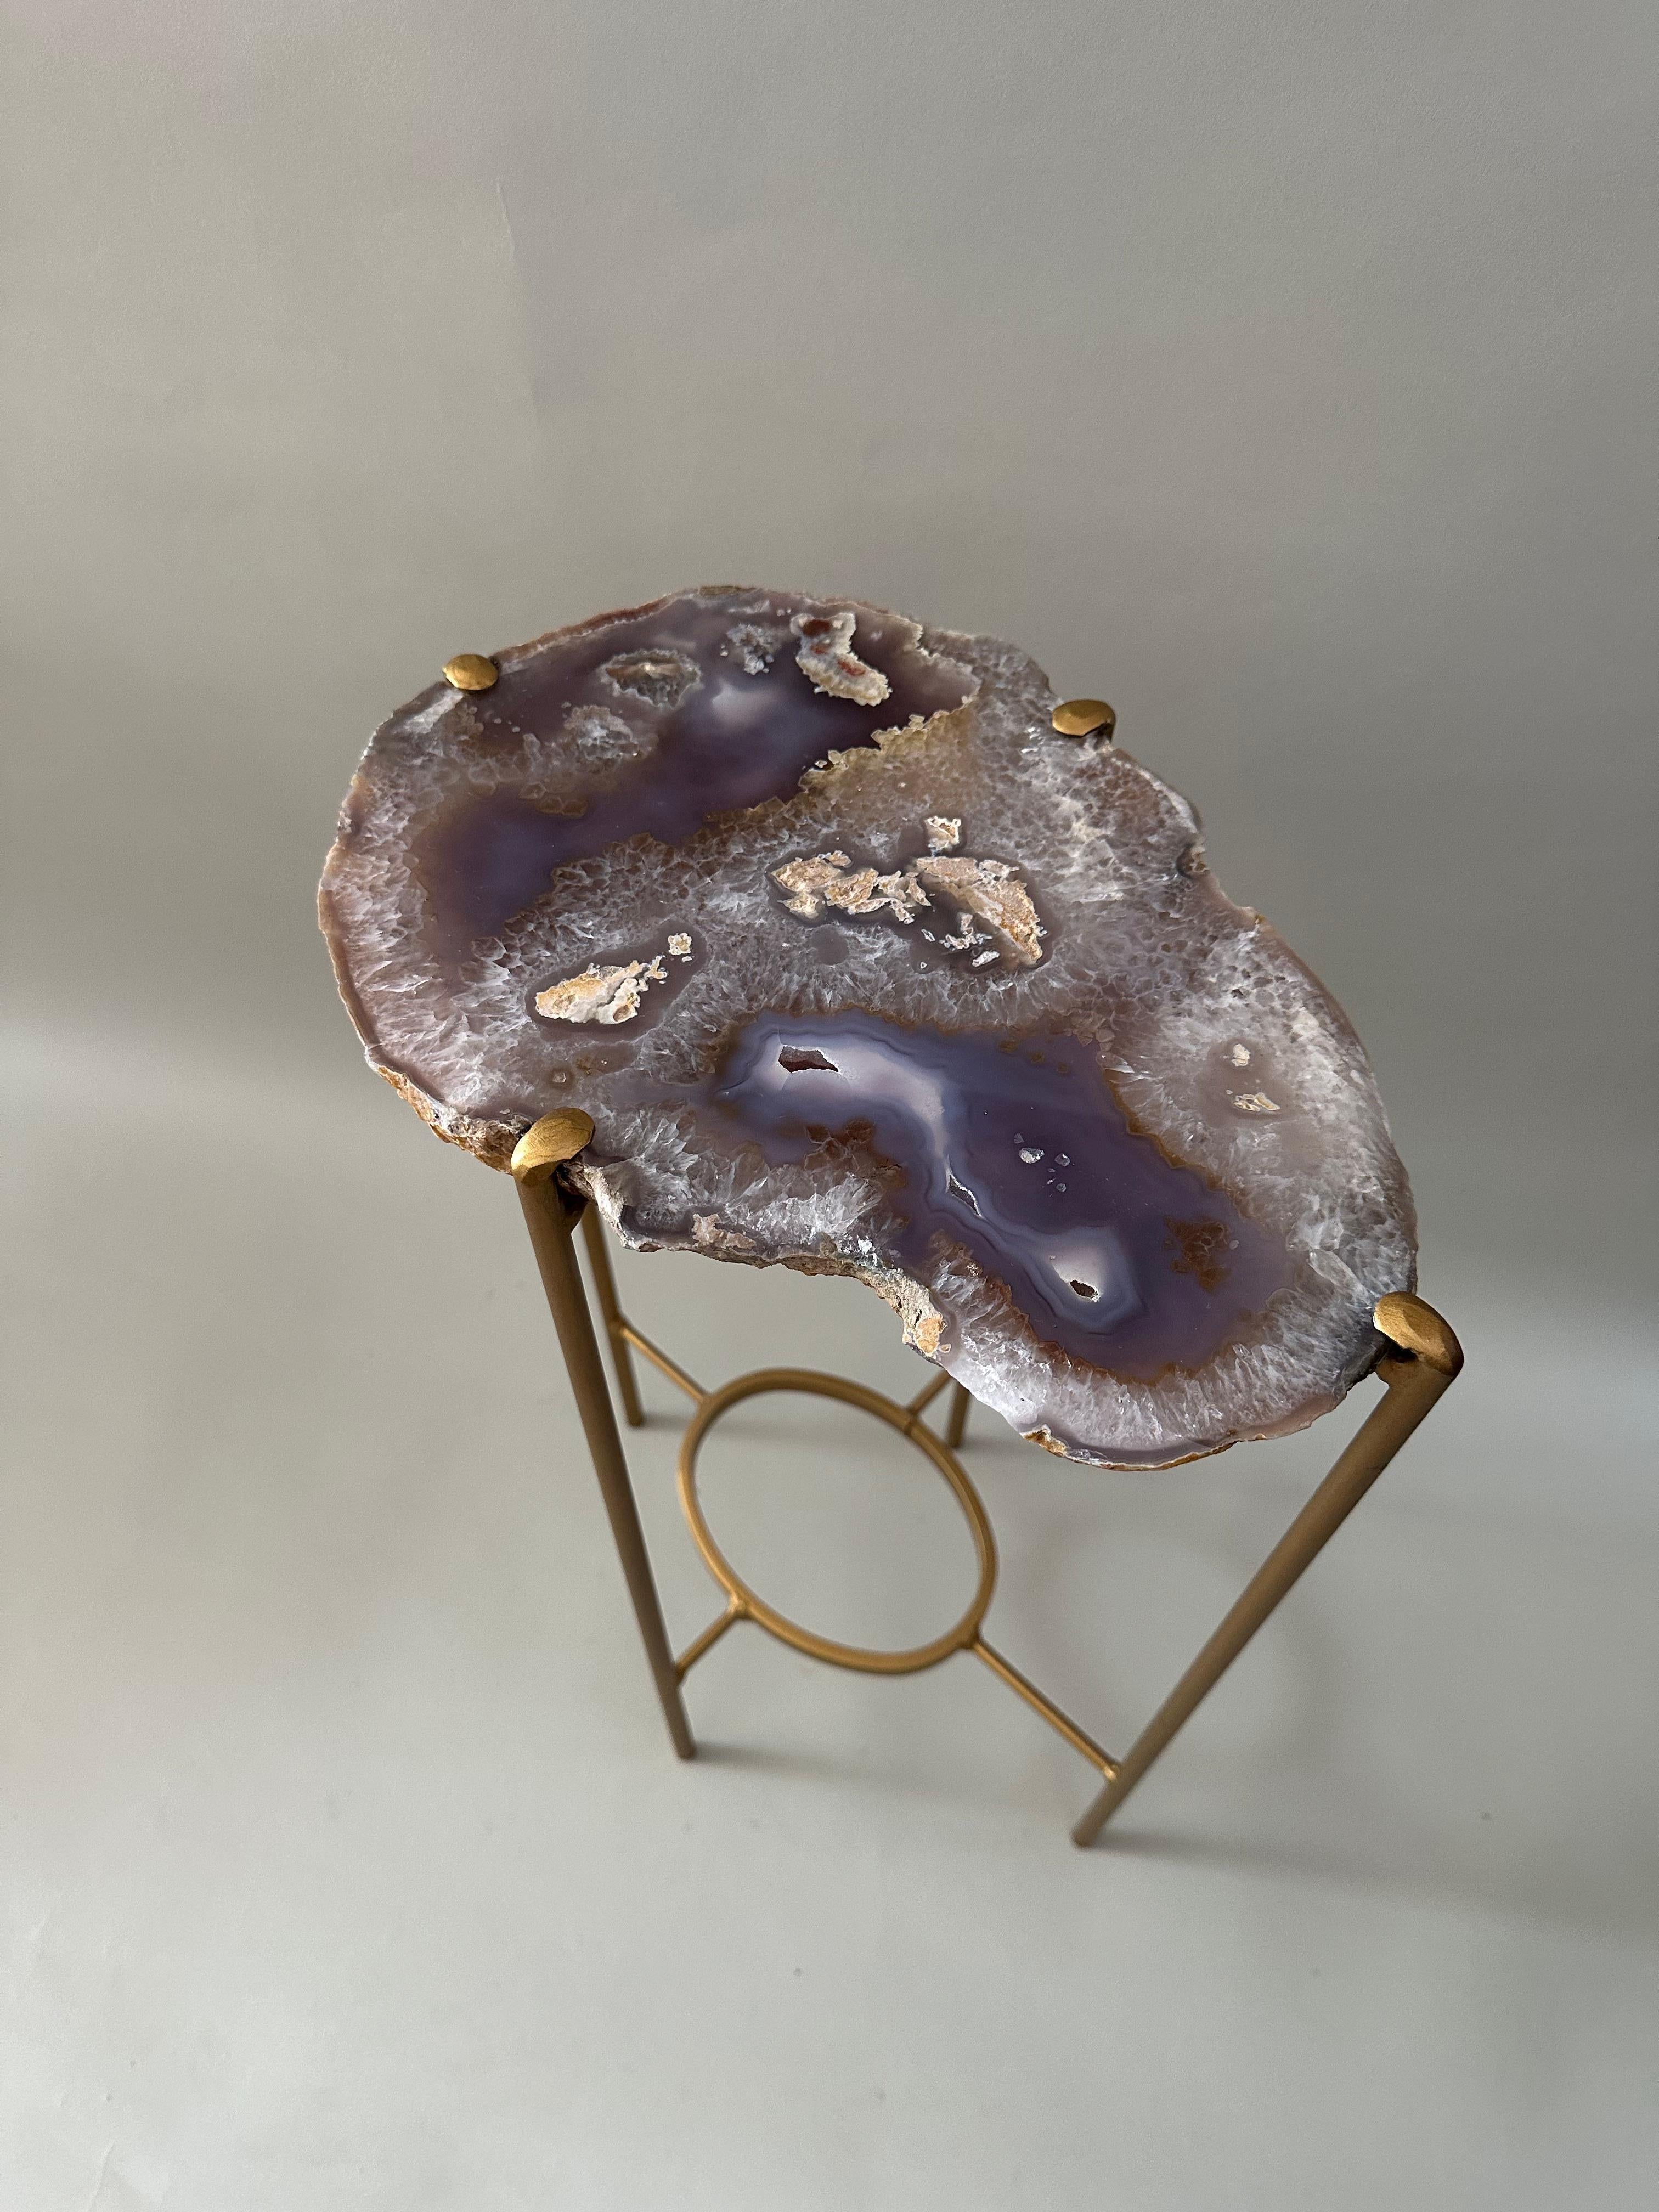 Unusual Modern Handcrafted Geode Drinks Table In Excellent Condition For Sale In Middleburg, VA